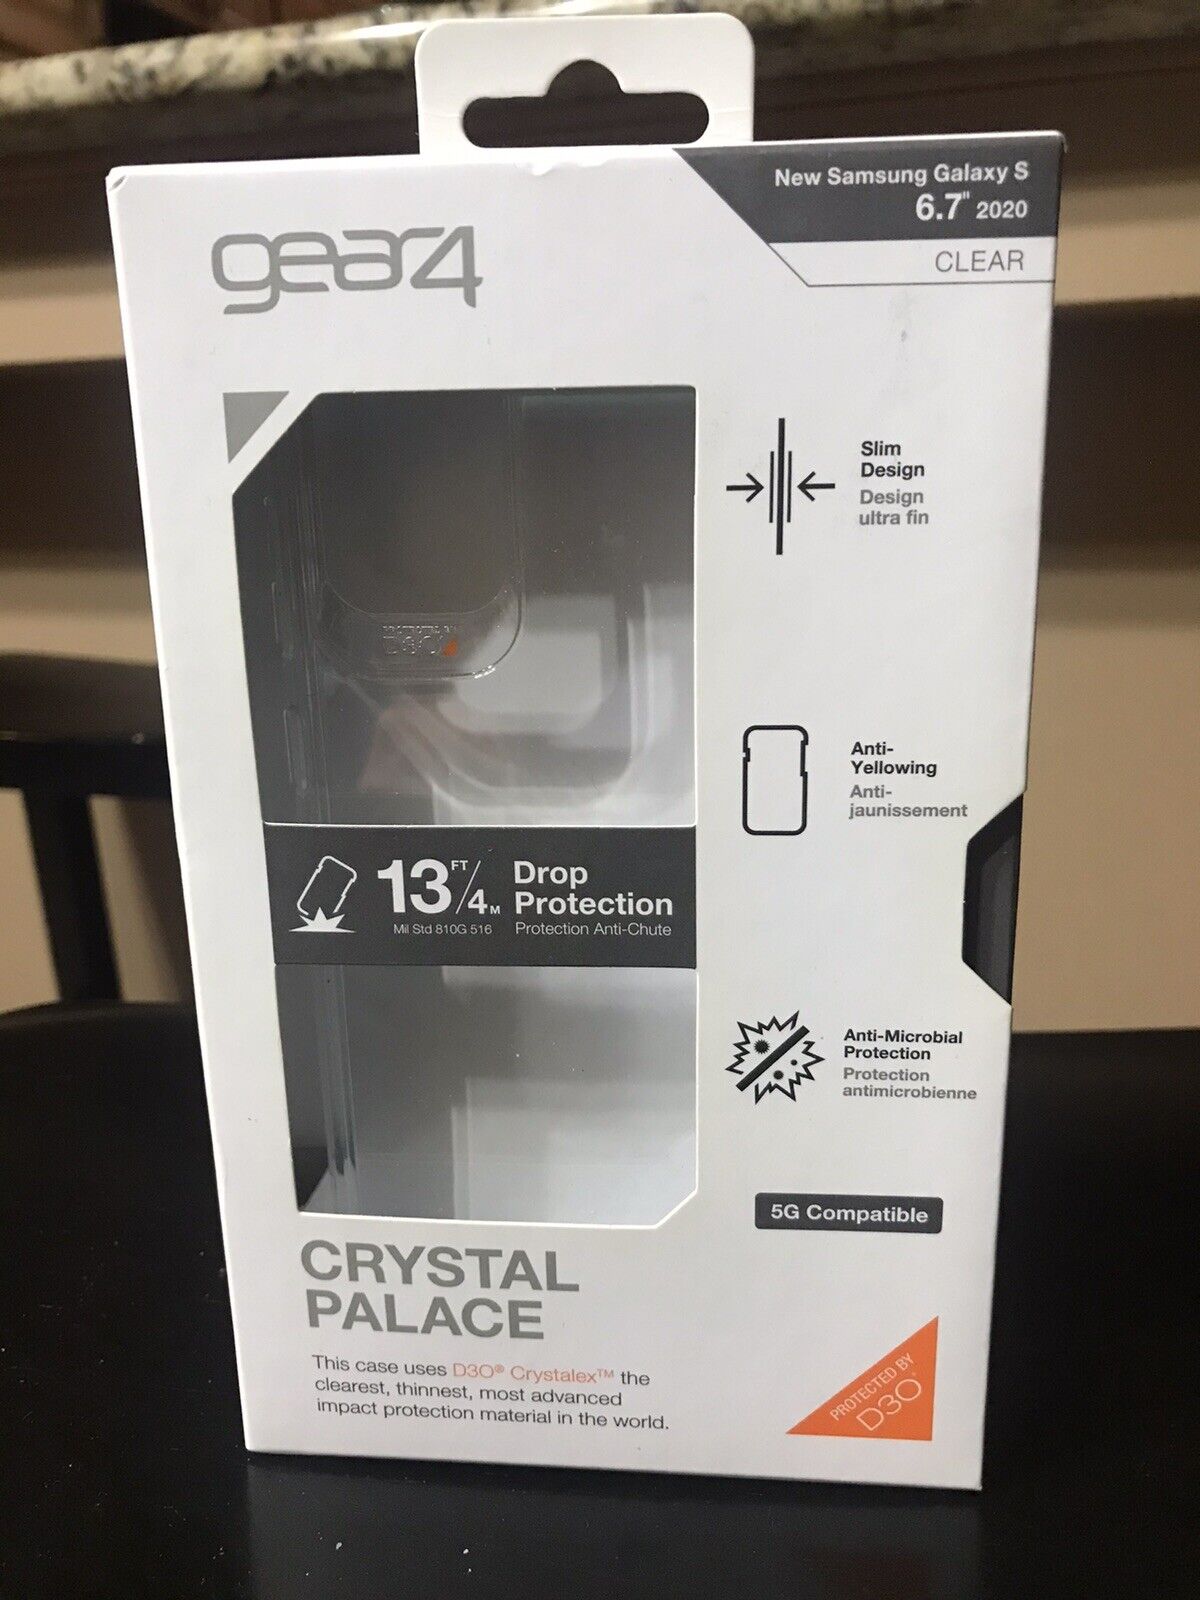 Gear4 New Samsung Galaxy S 6.7” 2020 Case Clear Crystal Palace 5G Compatible D30 Gear4 702004891